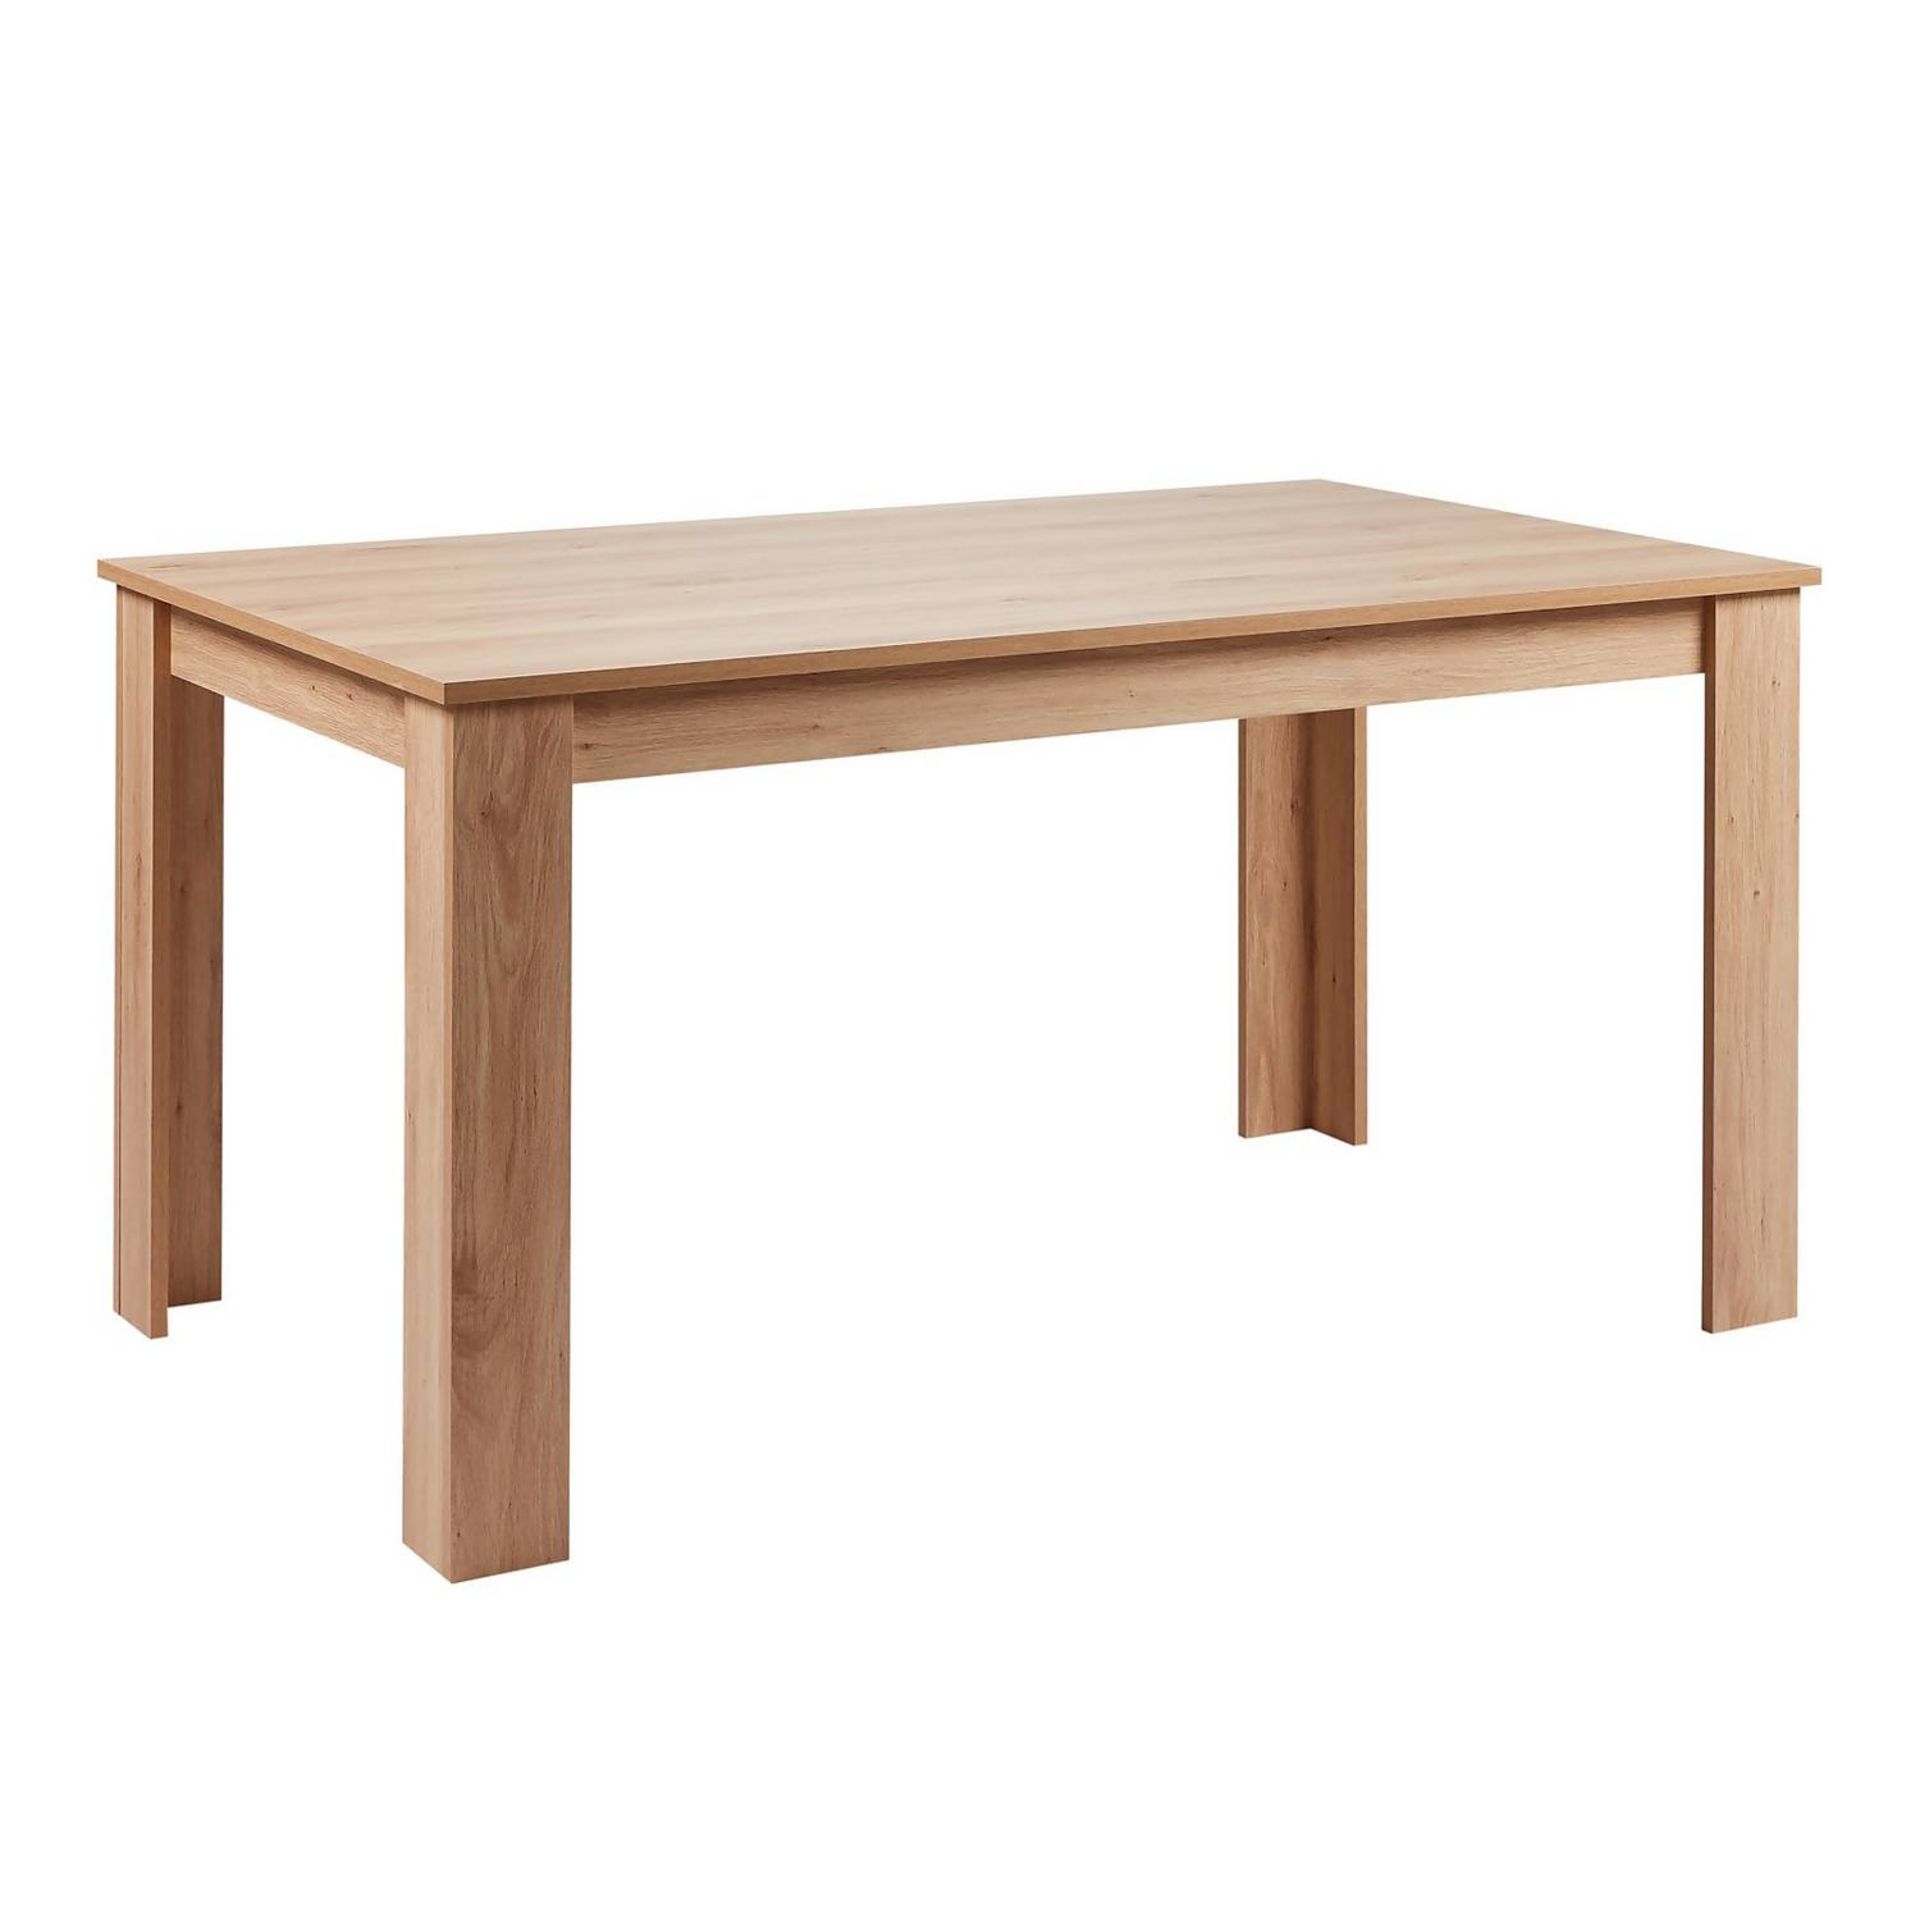 (P9) 1x Marcy Dining Table Oak RRP £150.